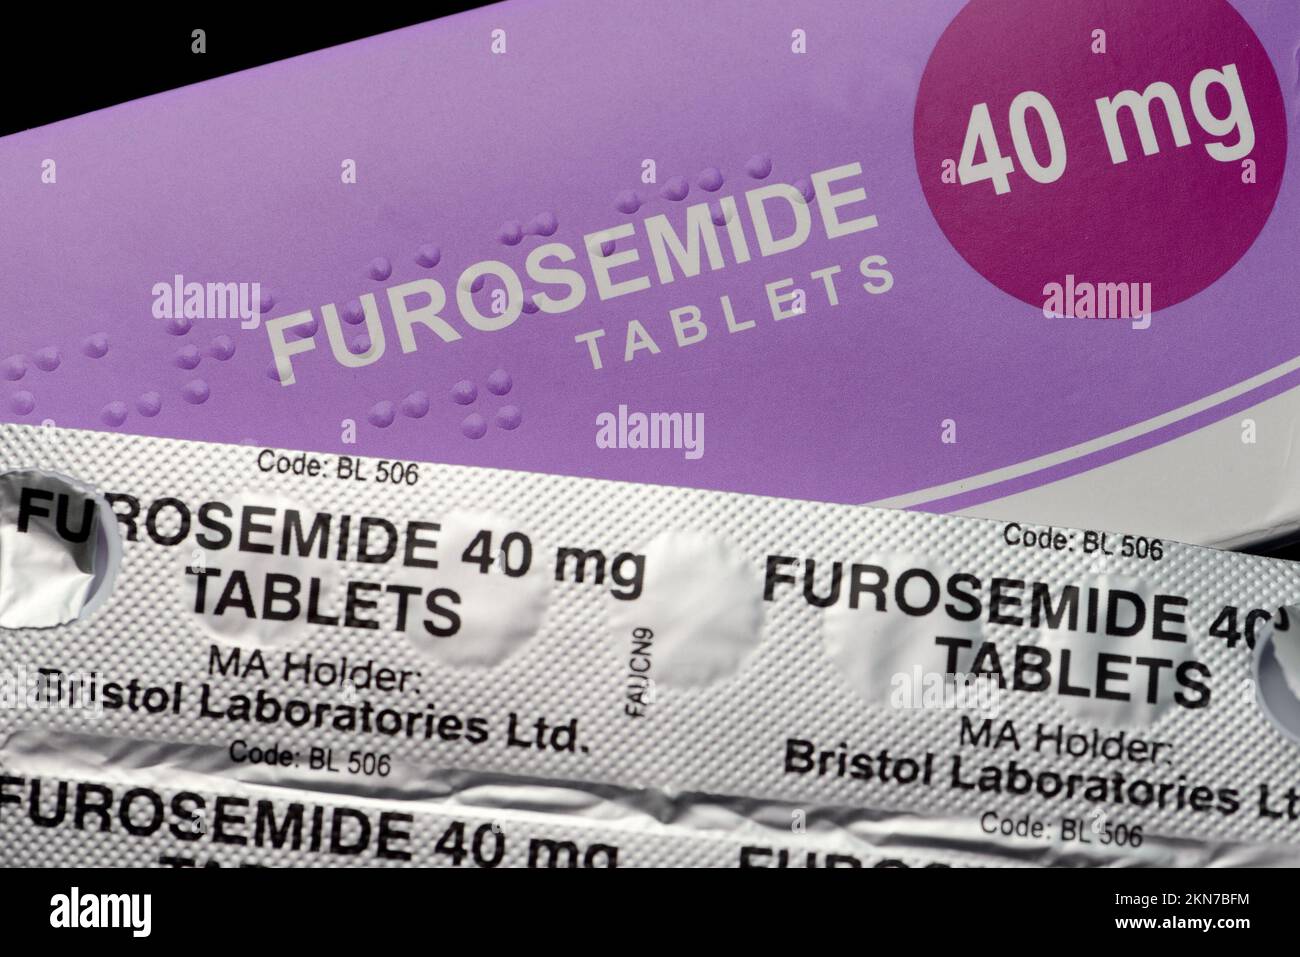 Furosomide - medicine to treat high blood pressure and oedema. 40mg tablets Stock Photo